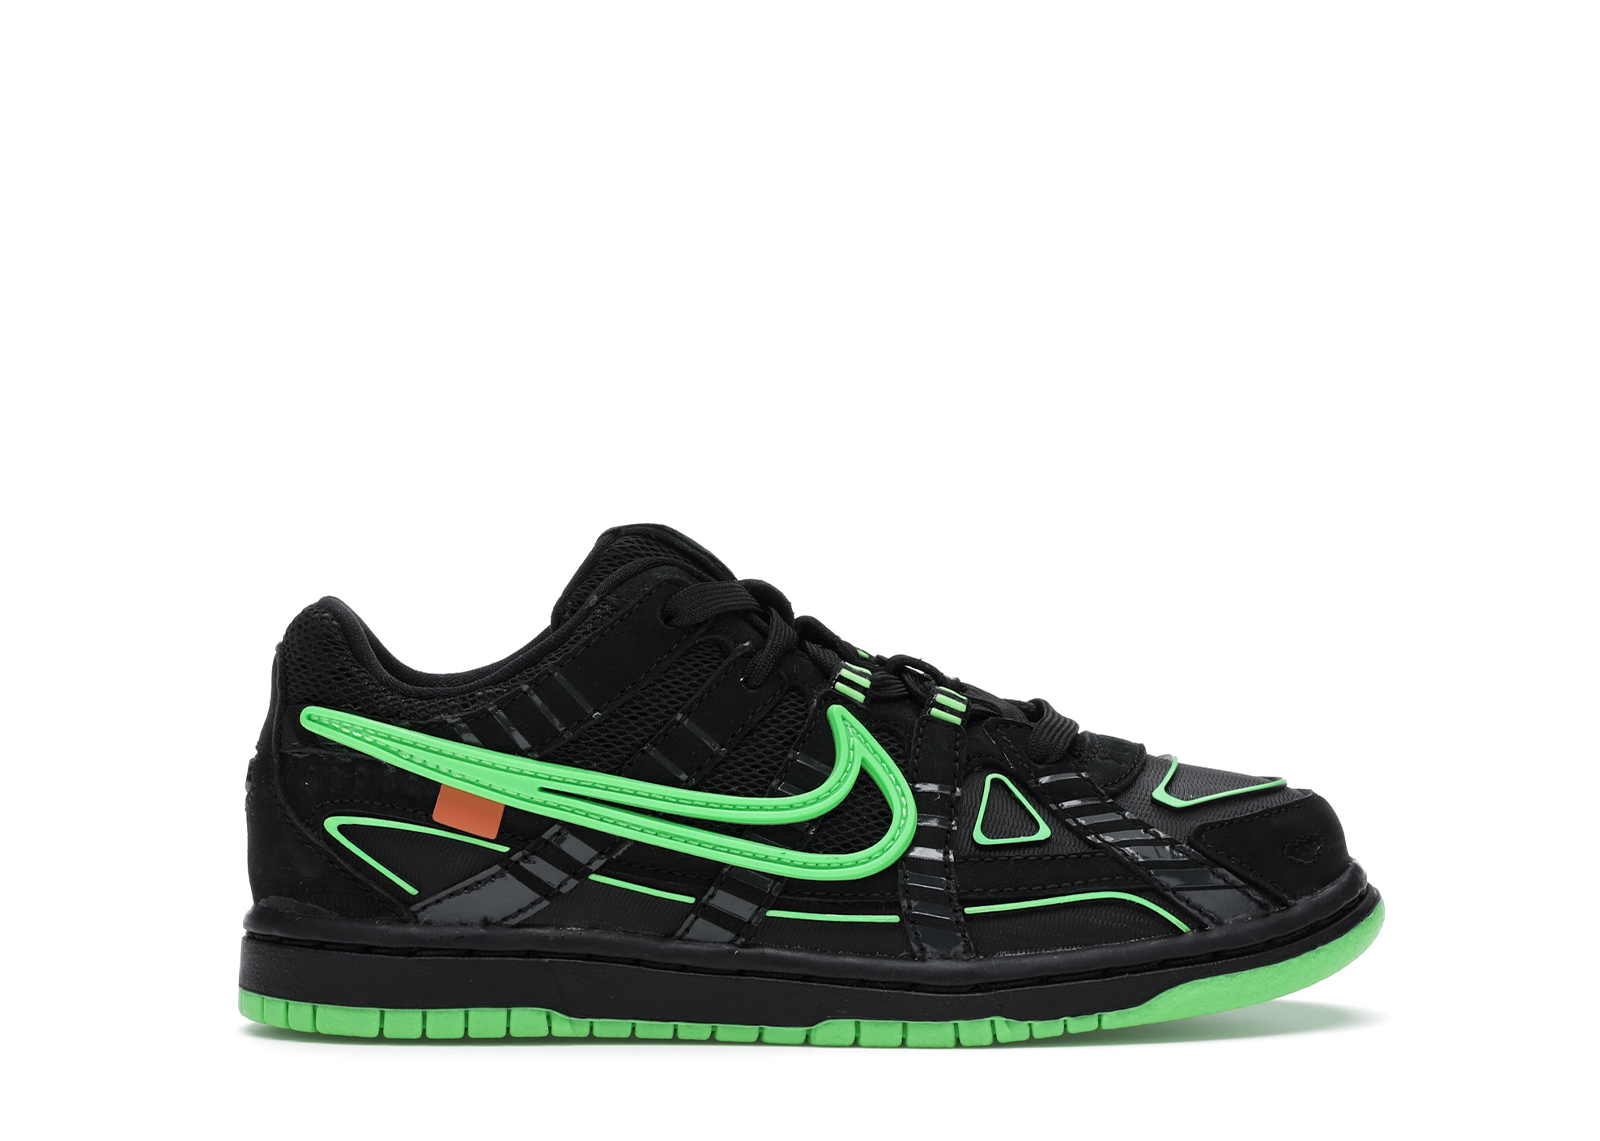 Nike Air Rubber Dunk Off-White Green Strike (PS) - CW7410-001